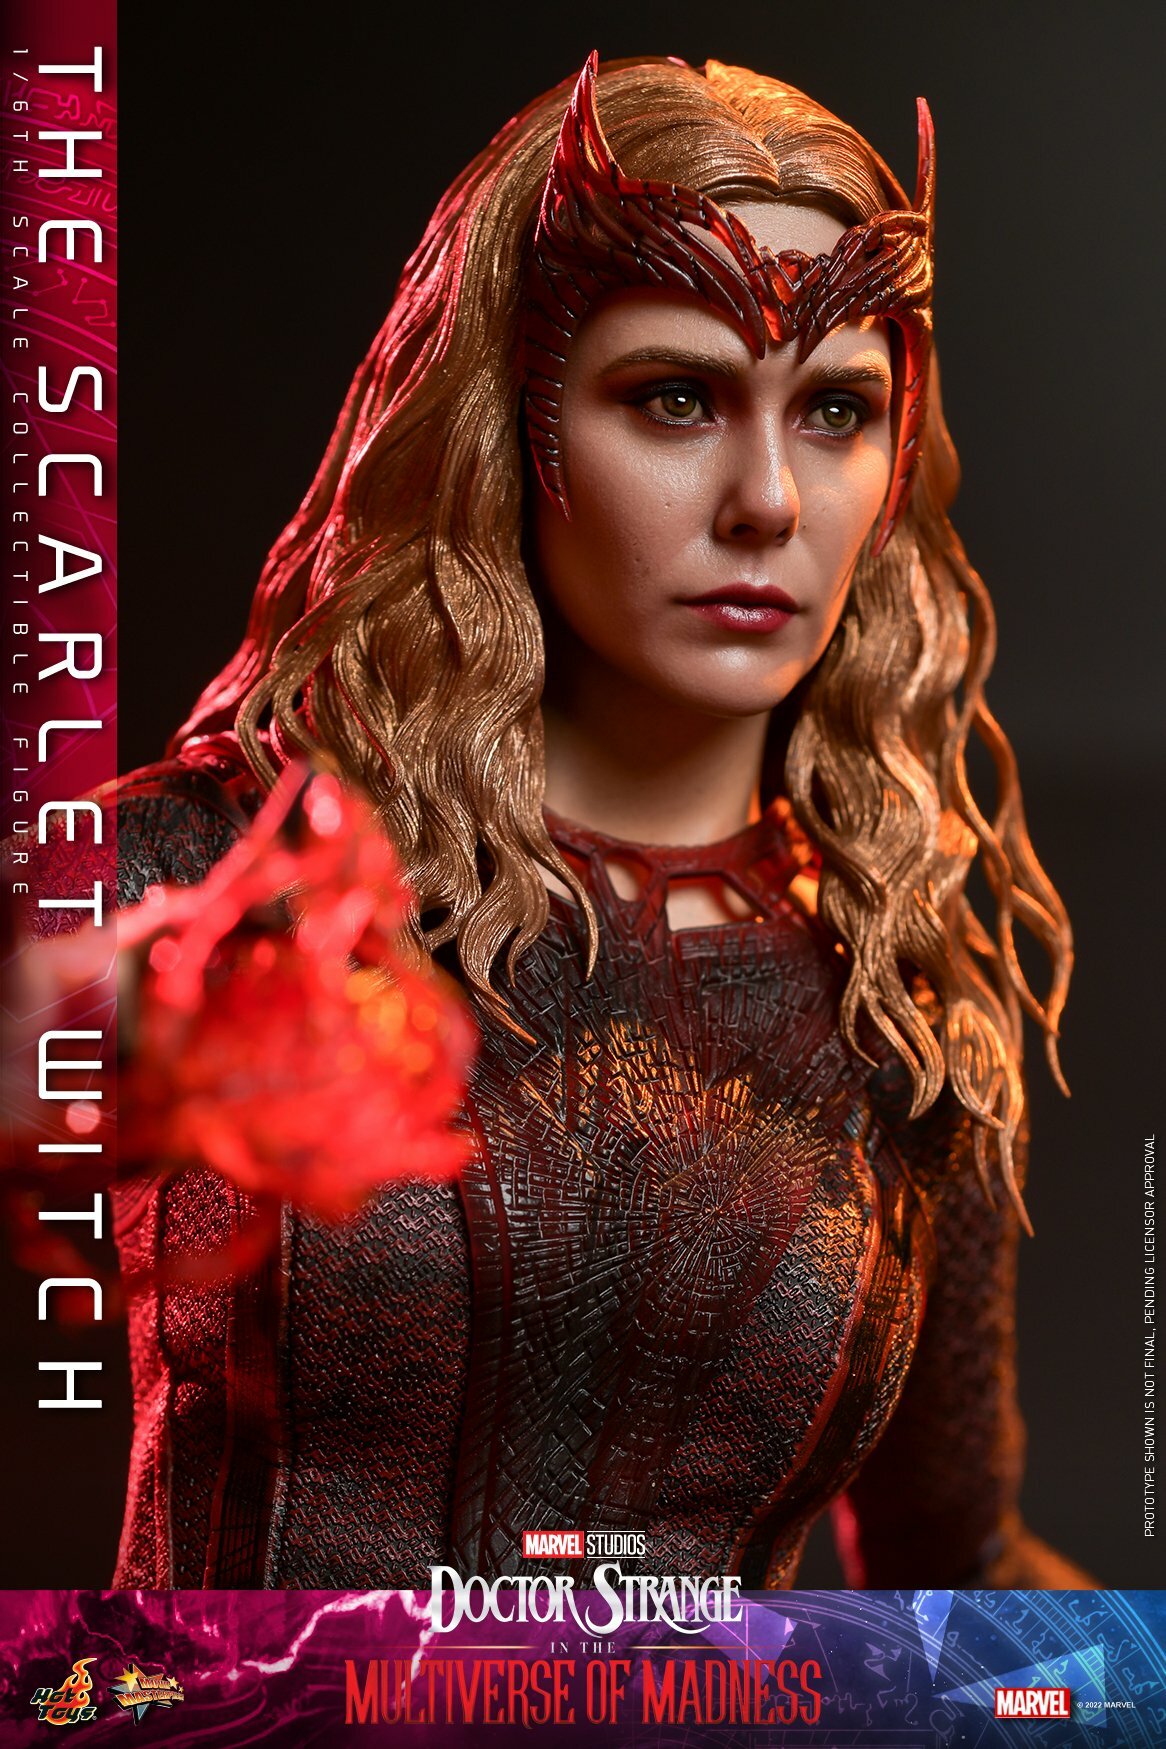 Hot-Toy-Multiverse-of-Madness-Scarlet-Witch-005.jpg.b3e205bf44525121838842f60dea823a.jpg